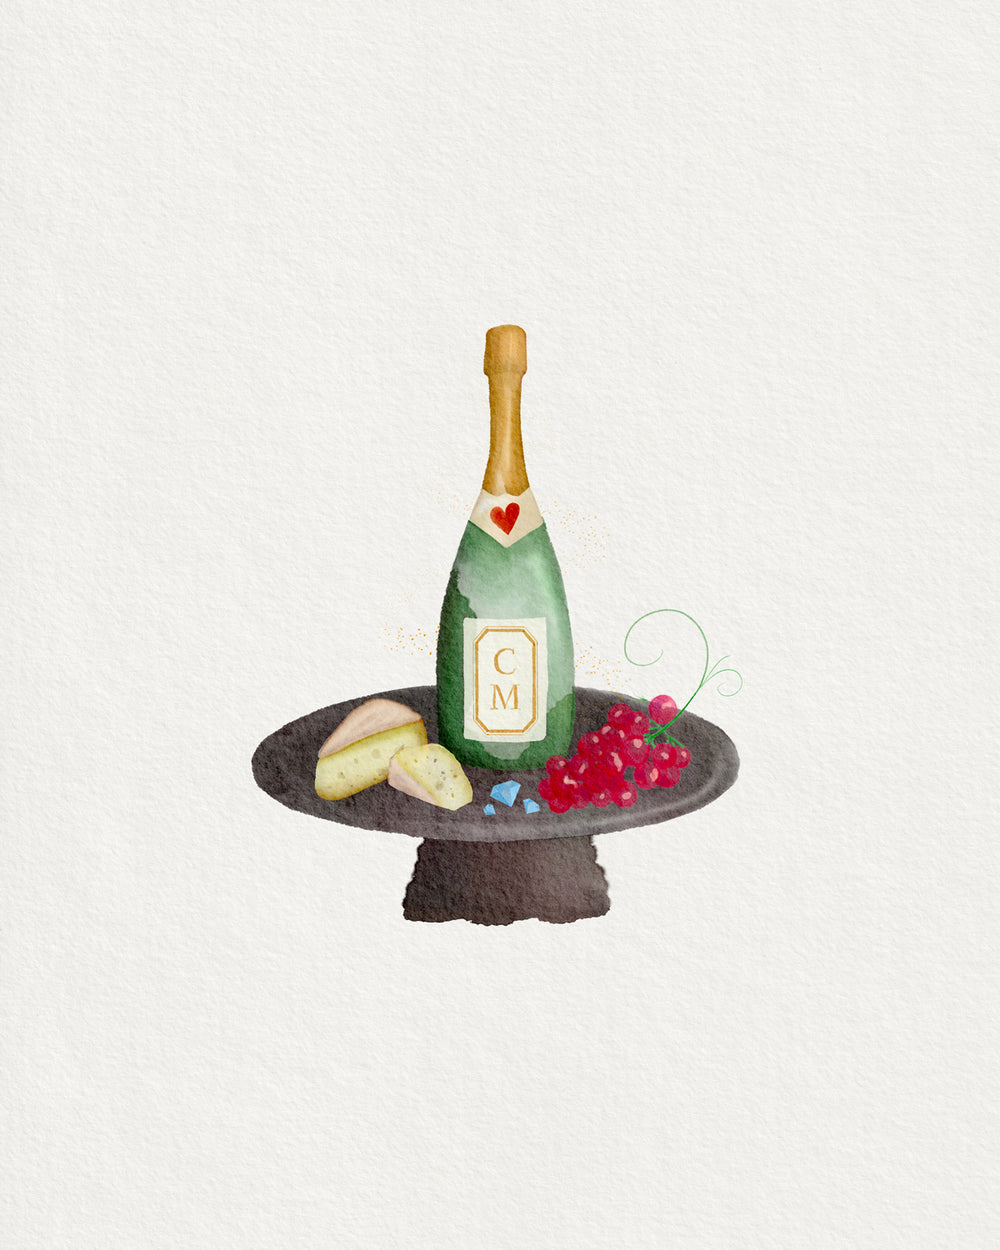 champagne, cheese and grapes at Claude and me jewellery illustration